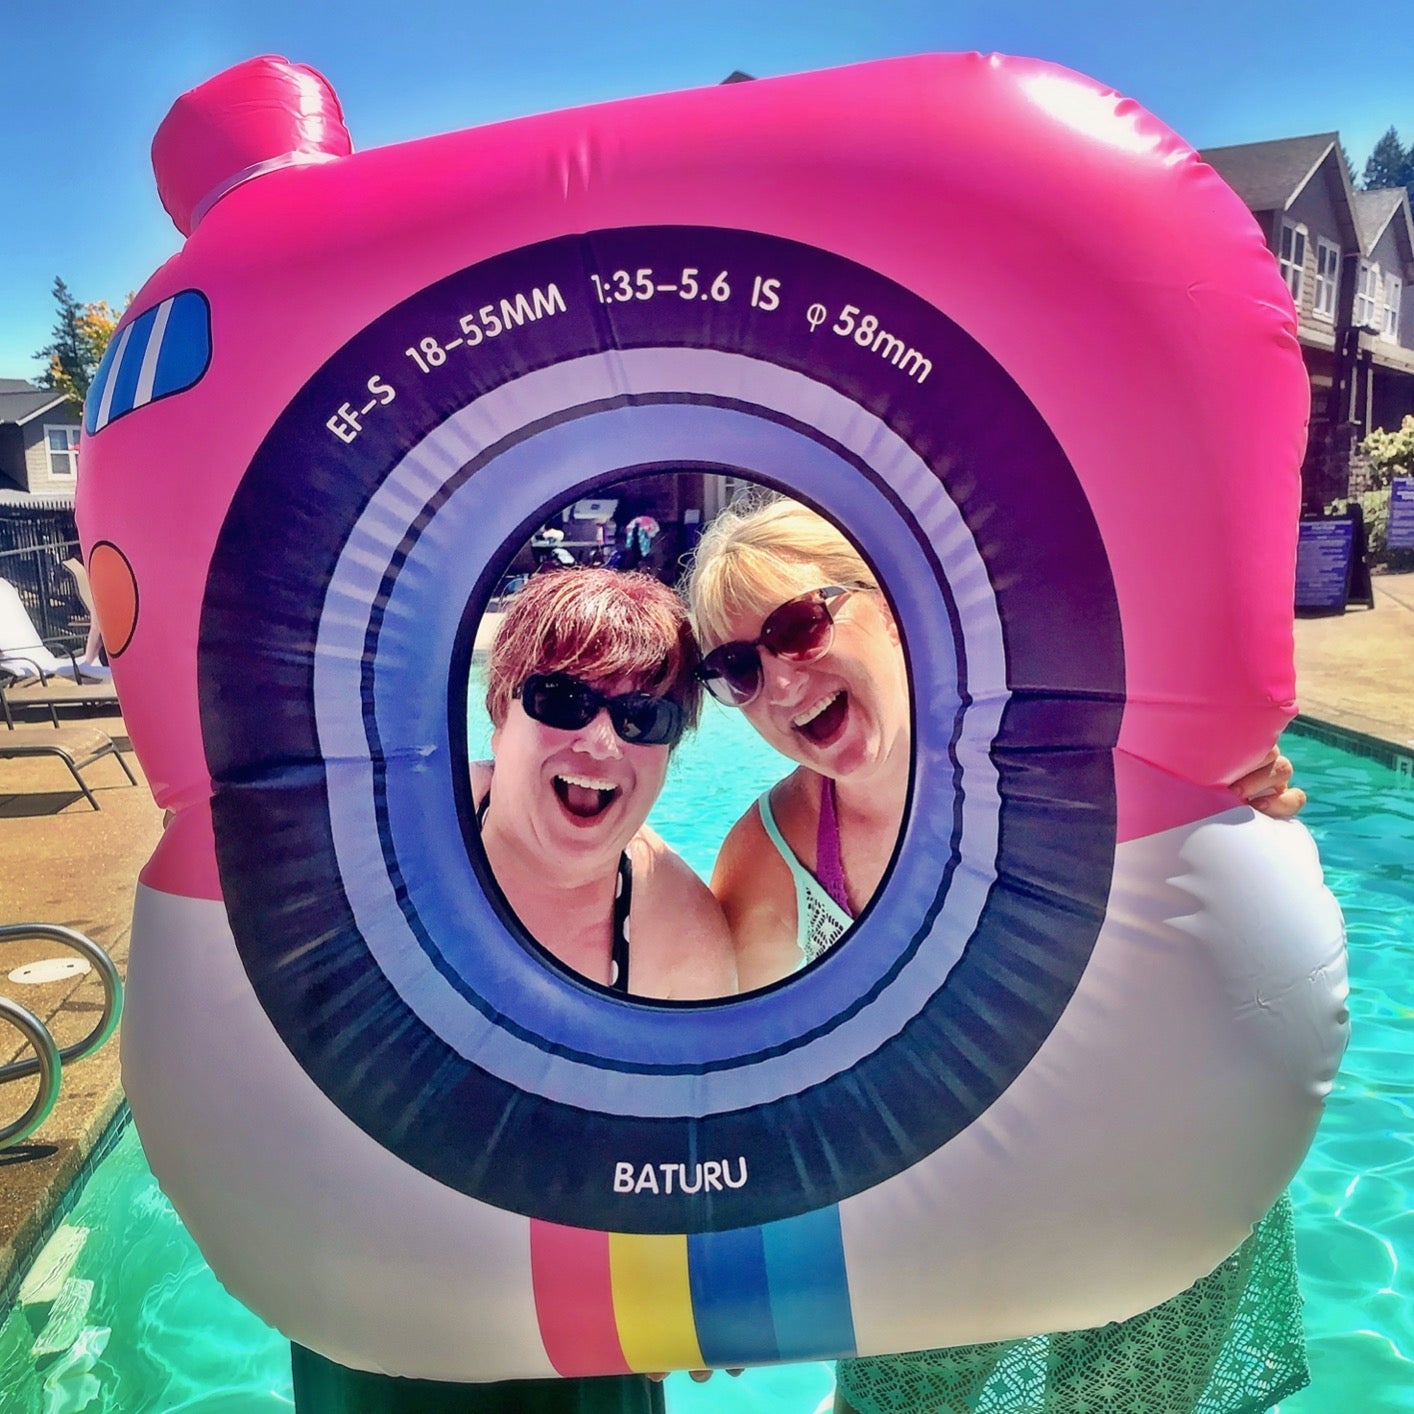 reviewers standing near a pool and posing by sticking their heads through the hole in the middle of the square, black, white, pink, blue, and yellow float that looks like a camera